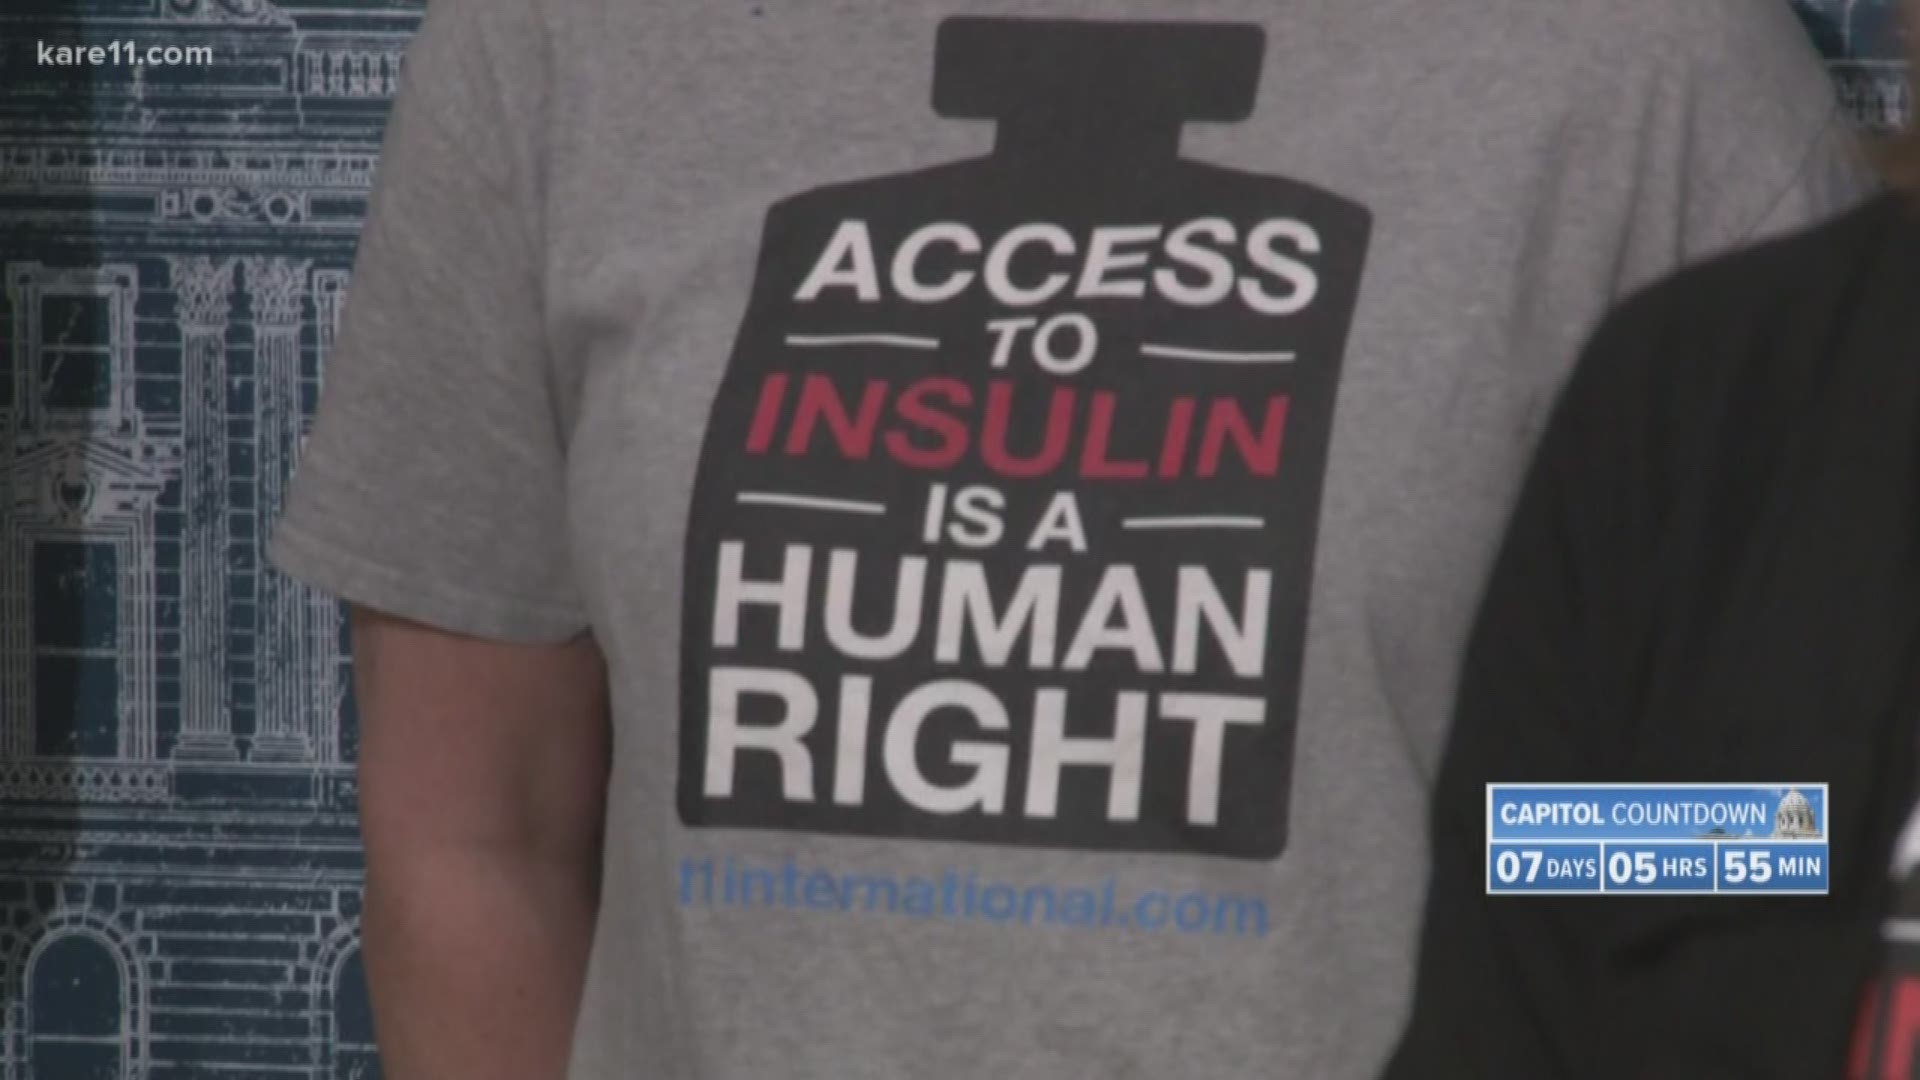 The Alec Smith Emergency Insulin bill has an uncertain fate at the State Capitol, because it's part of an omnibus bill that's in flux. The House version would create a statewide emergency supply system, that could grant 90 days worth of the life-saving drug. The Senate version would limit it to a 30-day supply. People with Type 1 diabetes have seen out-of-pocket costs soar for a drug that's 10 times cheaper in Canada.